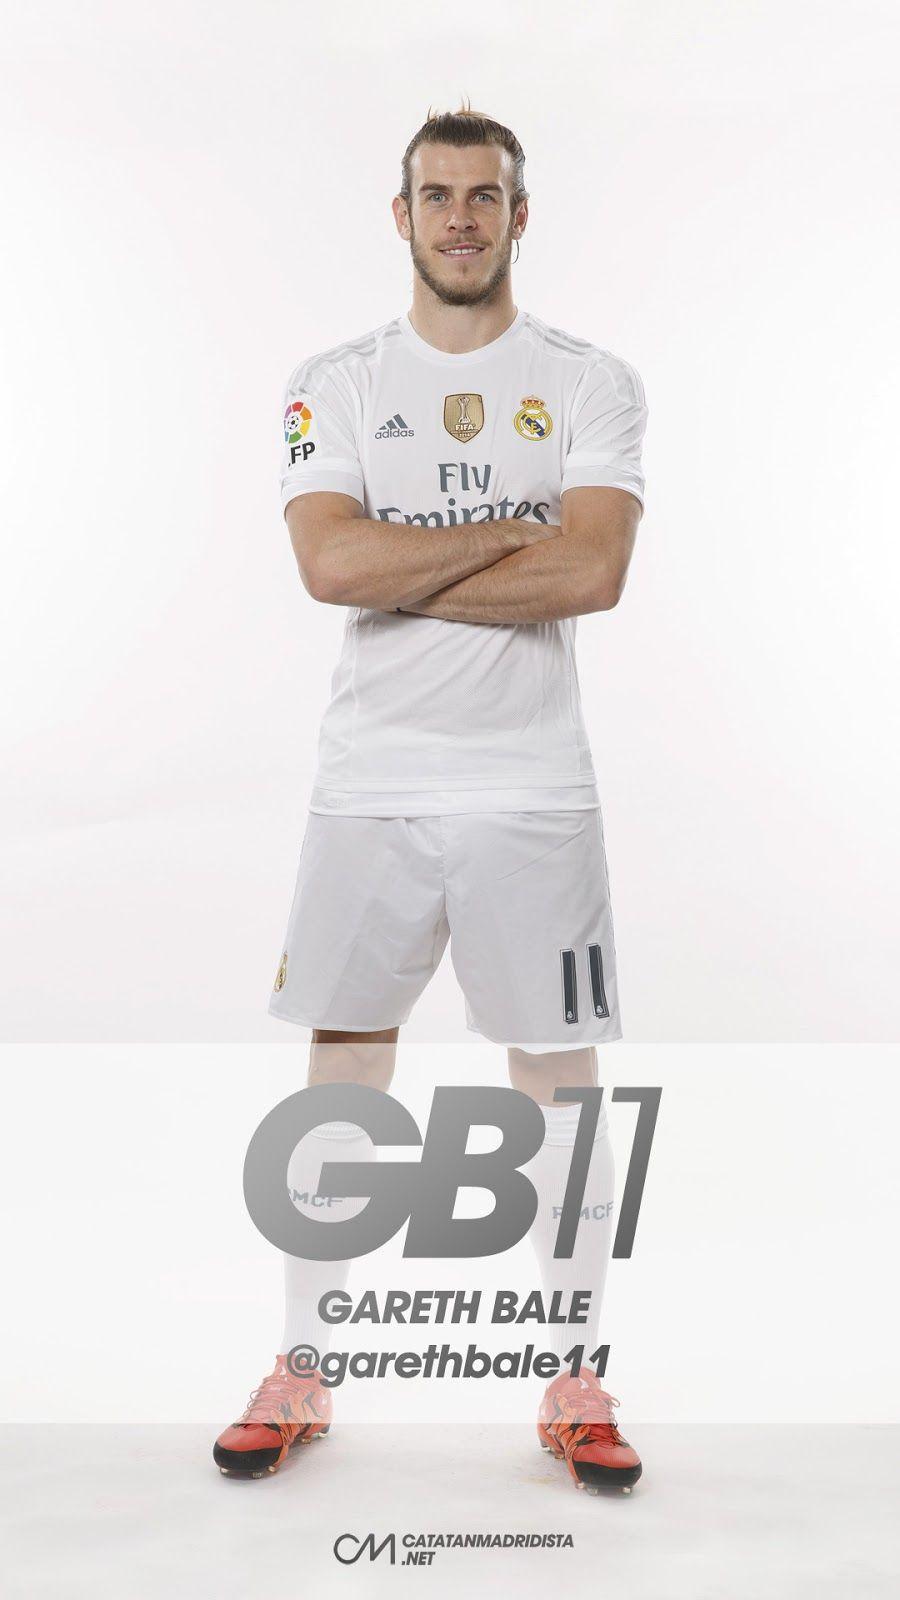 Gareth Bale Cool Wallpaper For iPhone and Android